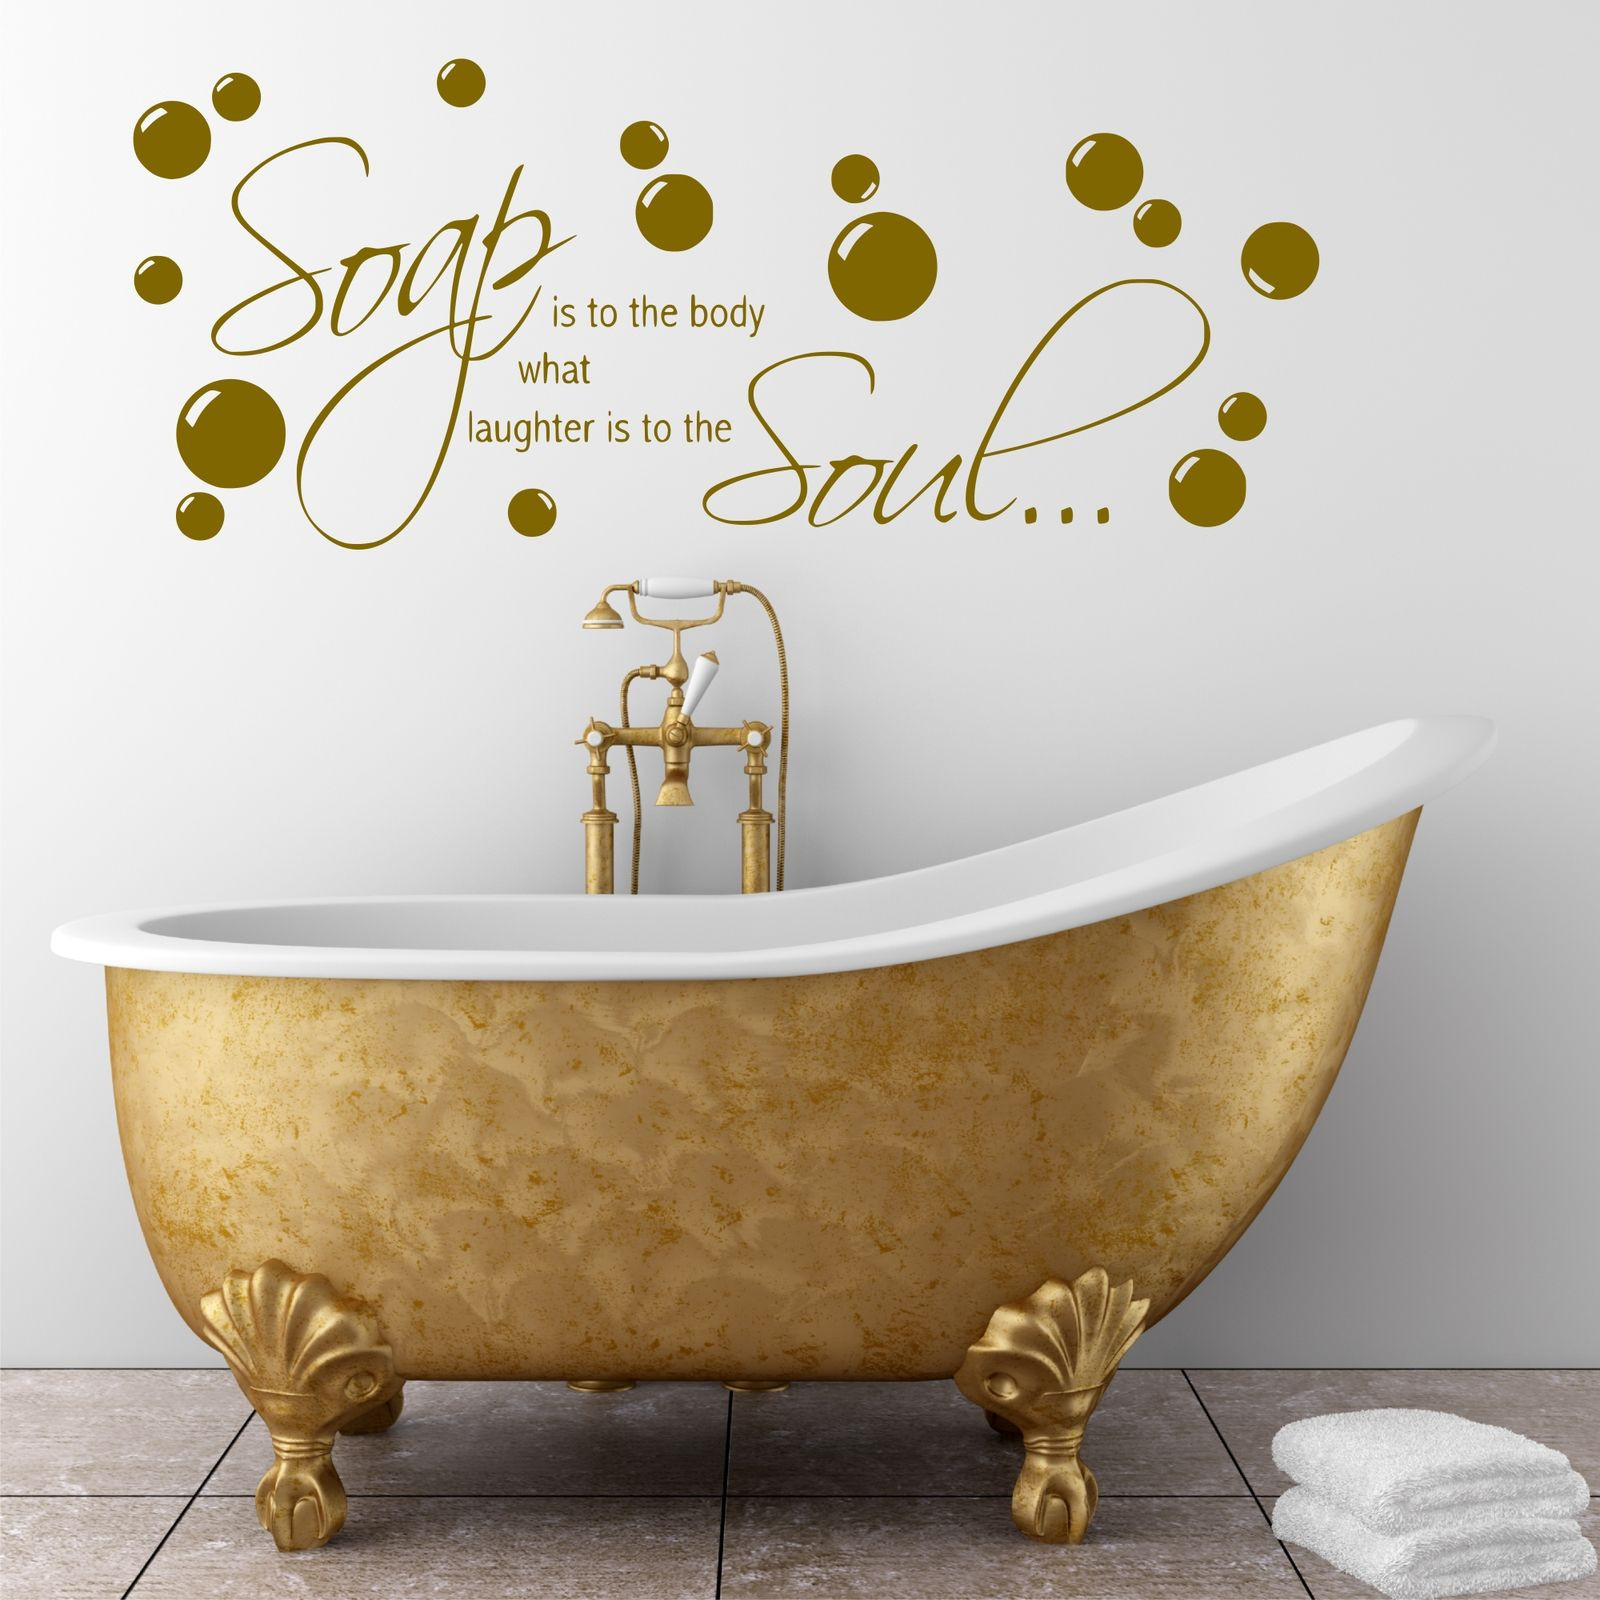 Wall Decals For Bathroom
 Bathroom Wall quote Soap Body Wall Sticker Decal Transfer